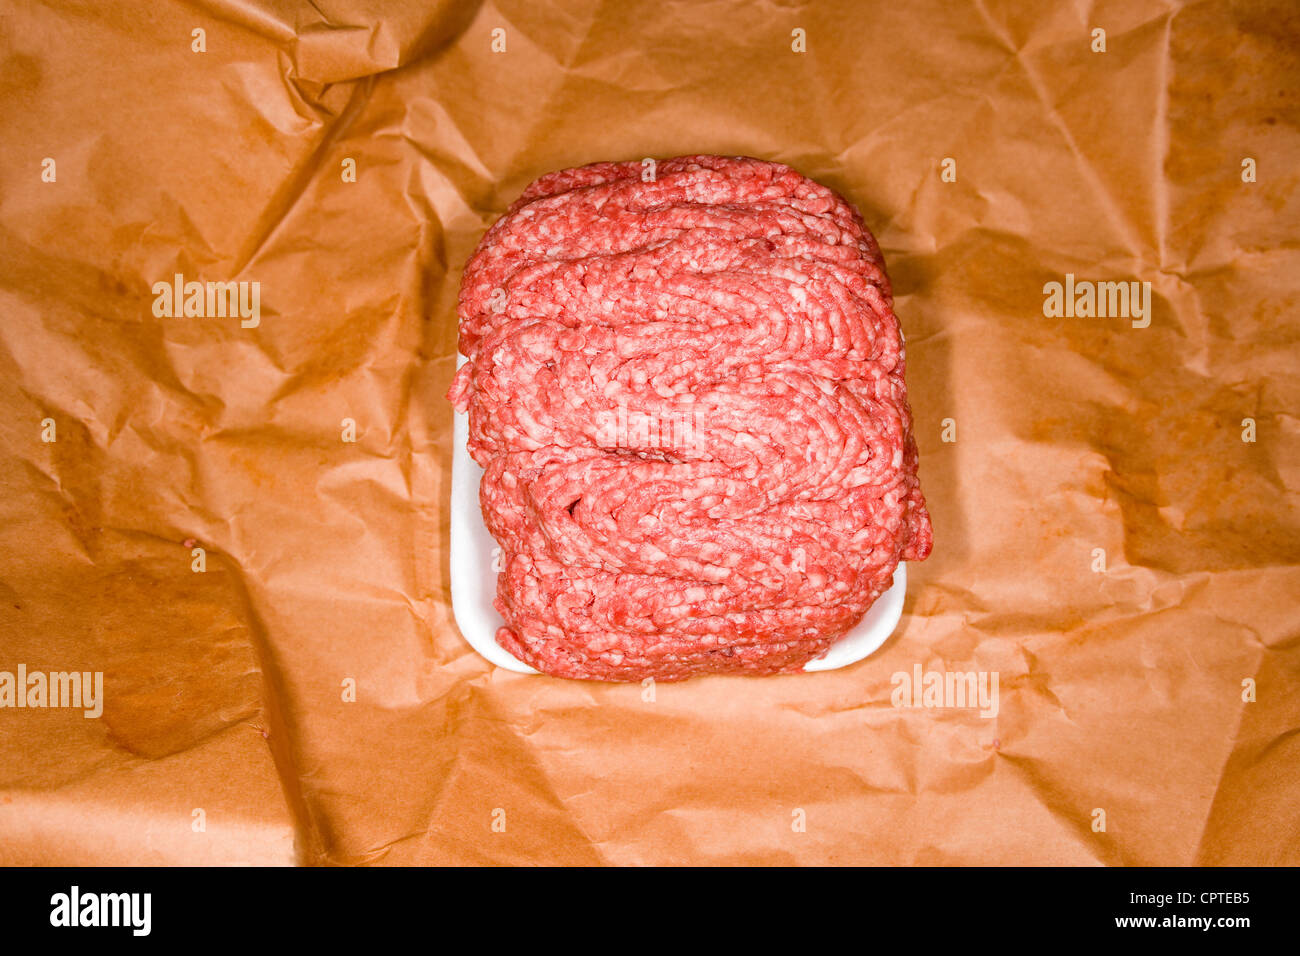 Raw minced beef on brown paper Stock Photo